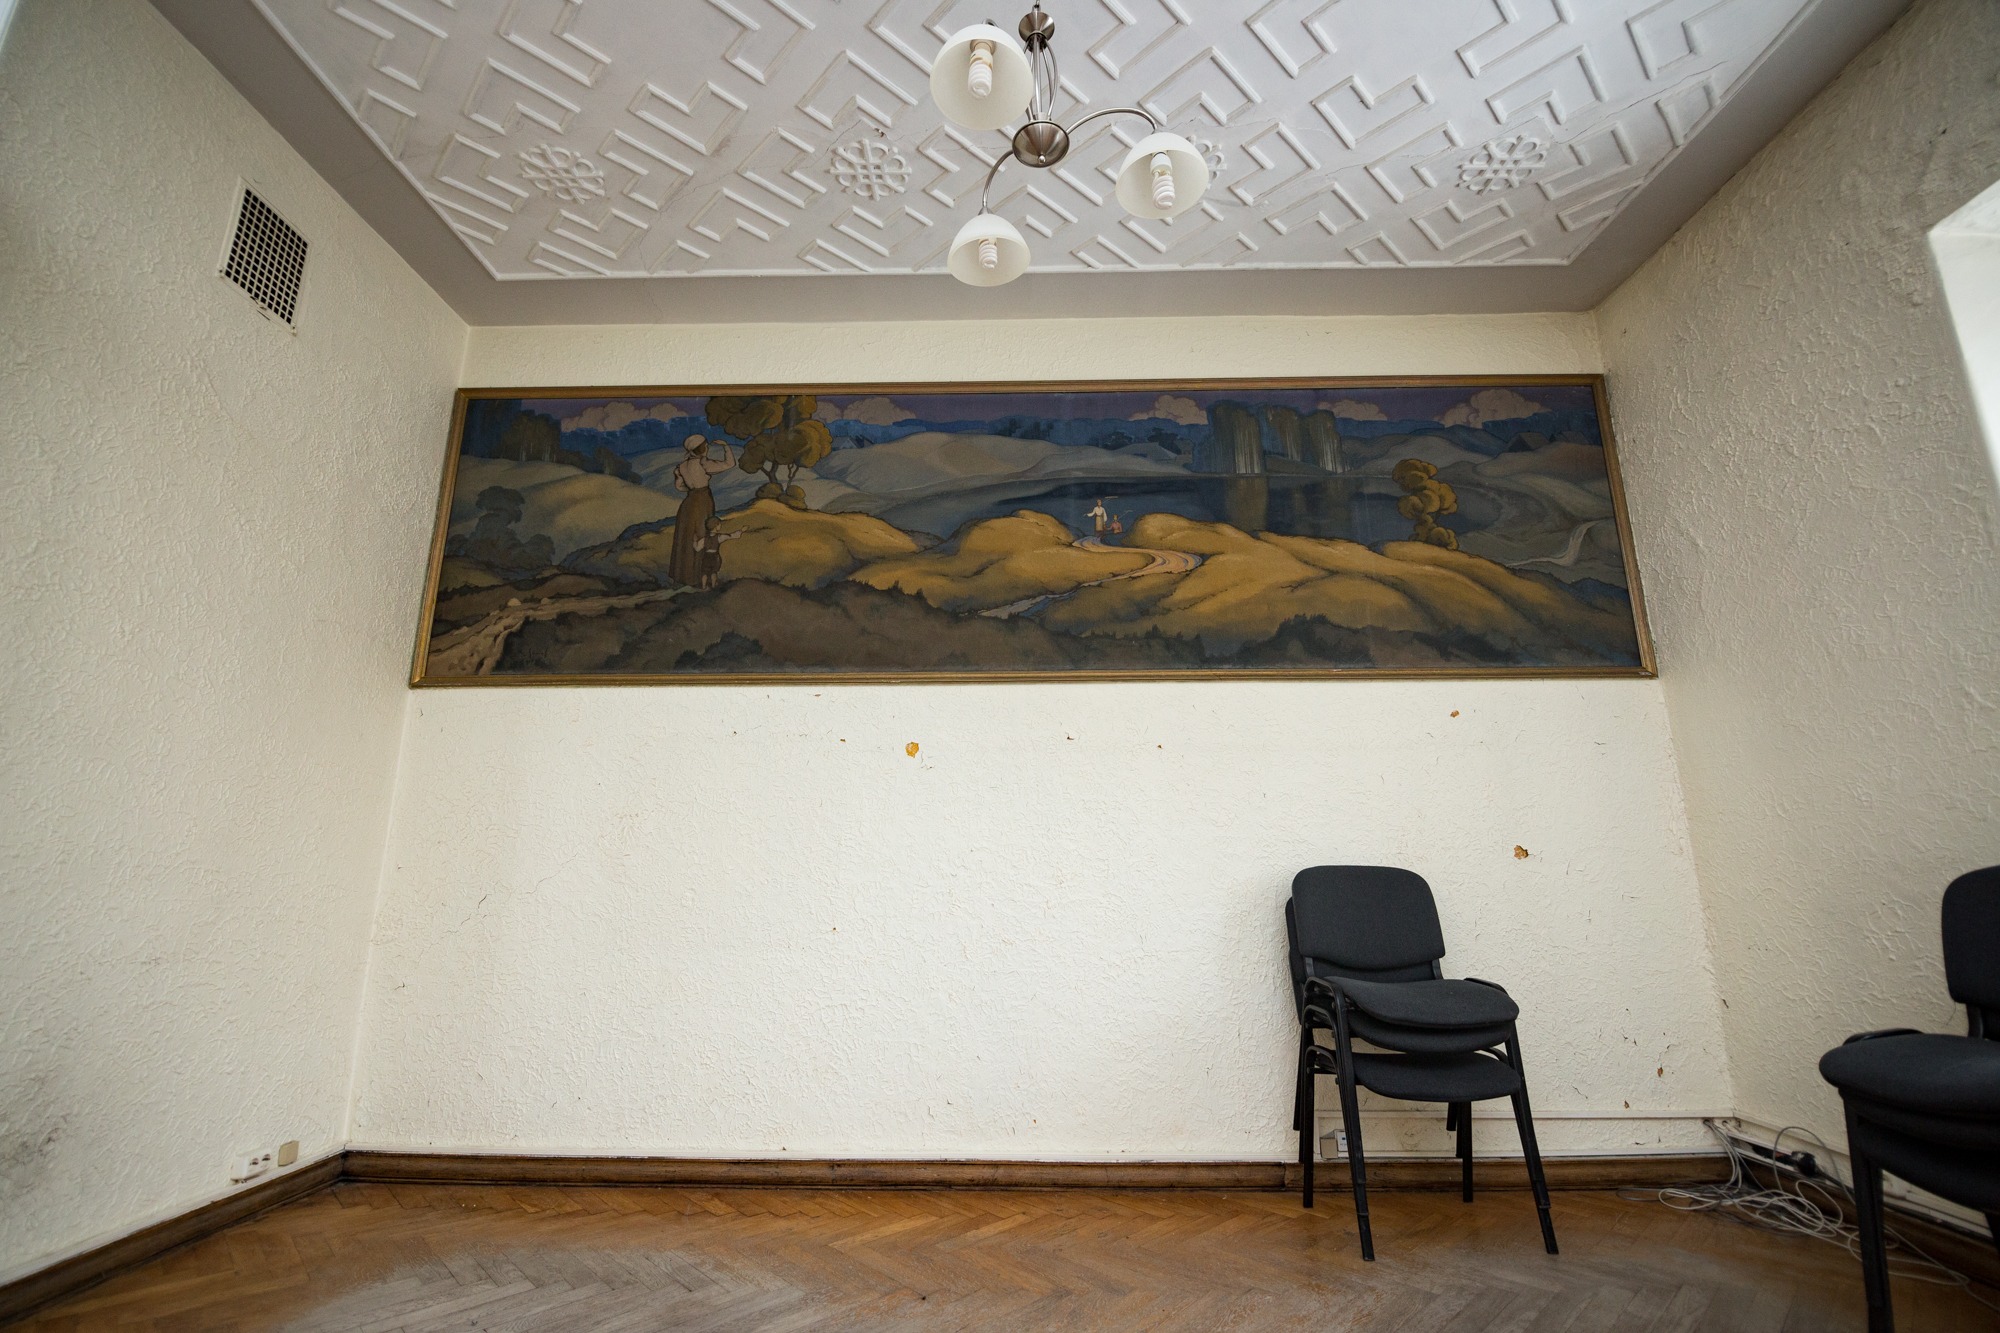 The room of the Sigulda New Palace with artwork on the wall and armchairs